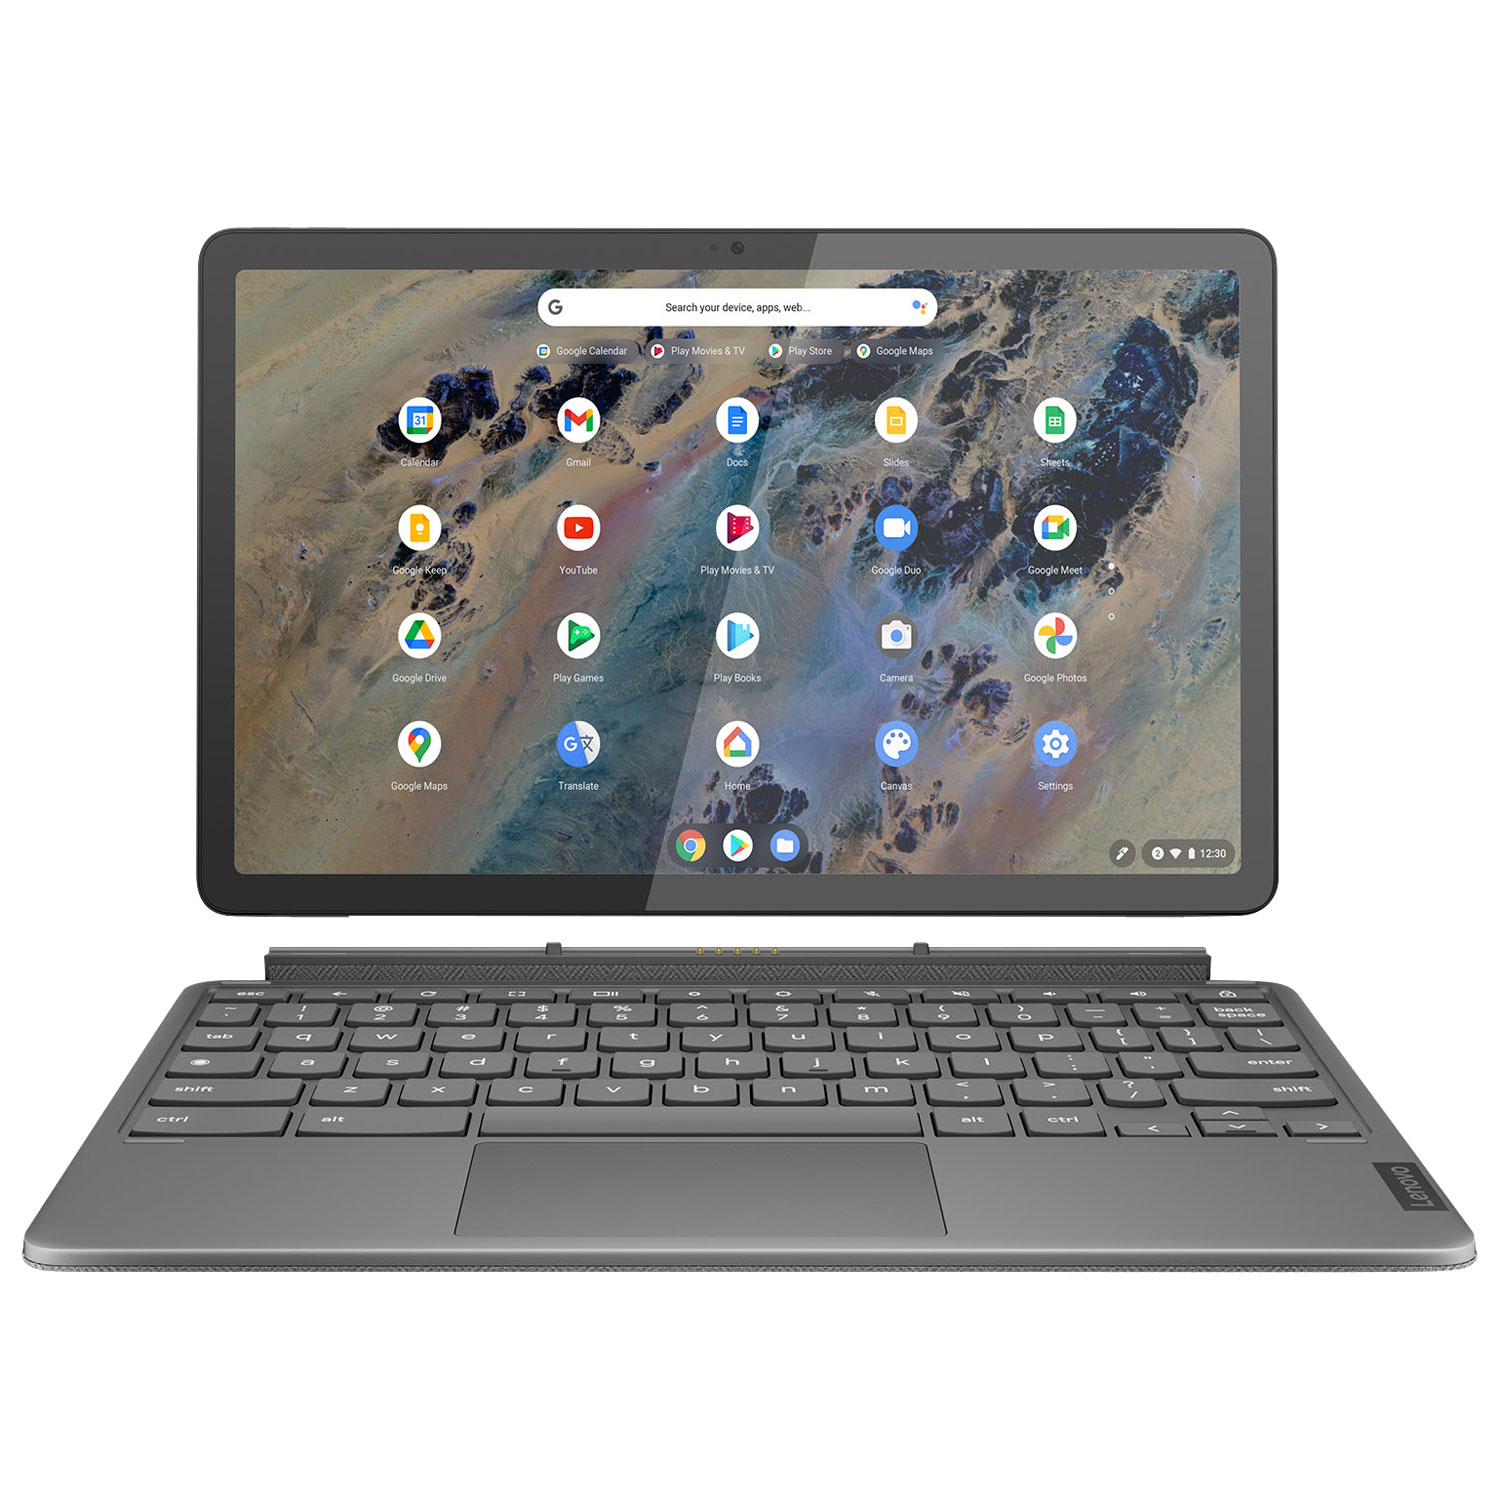 Lenovo IdeaPad Duet 3 128GB Chrome OS Tablet w/ SnapDragon 7c 8-Core Processor - Storm Grey - Only at Best Buy